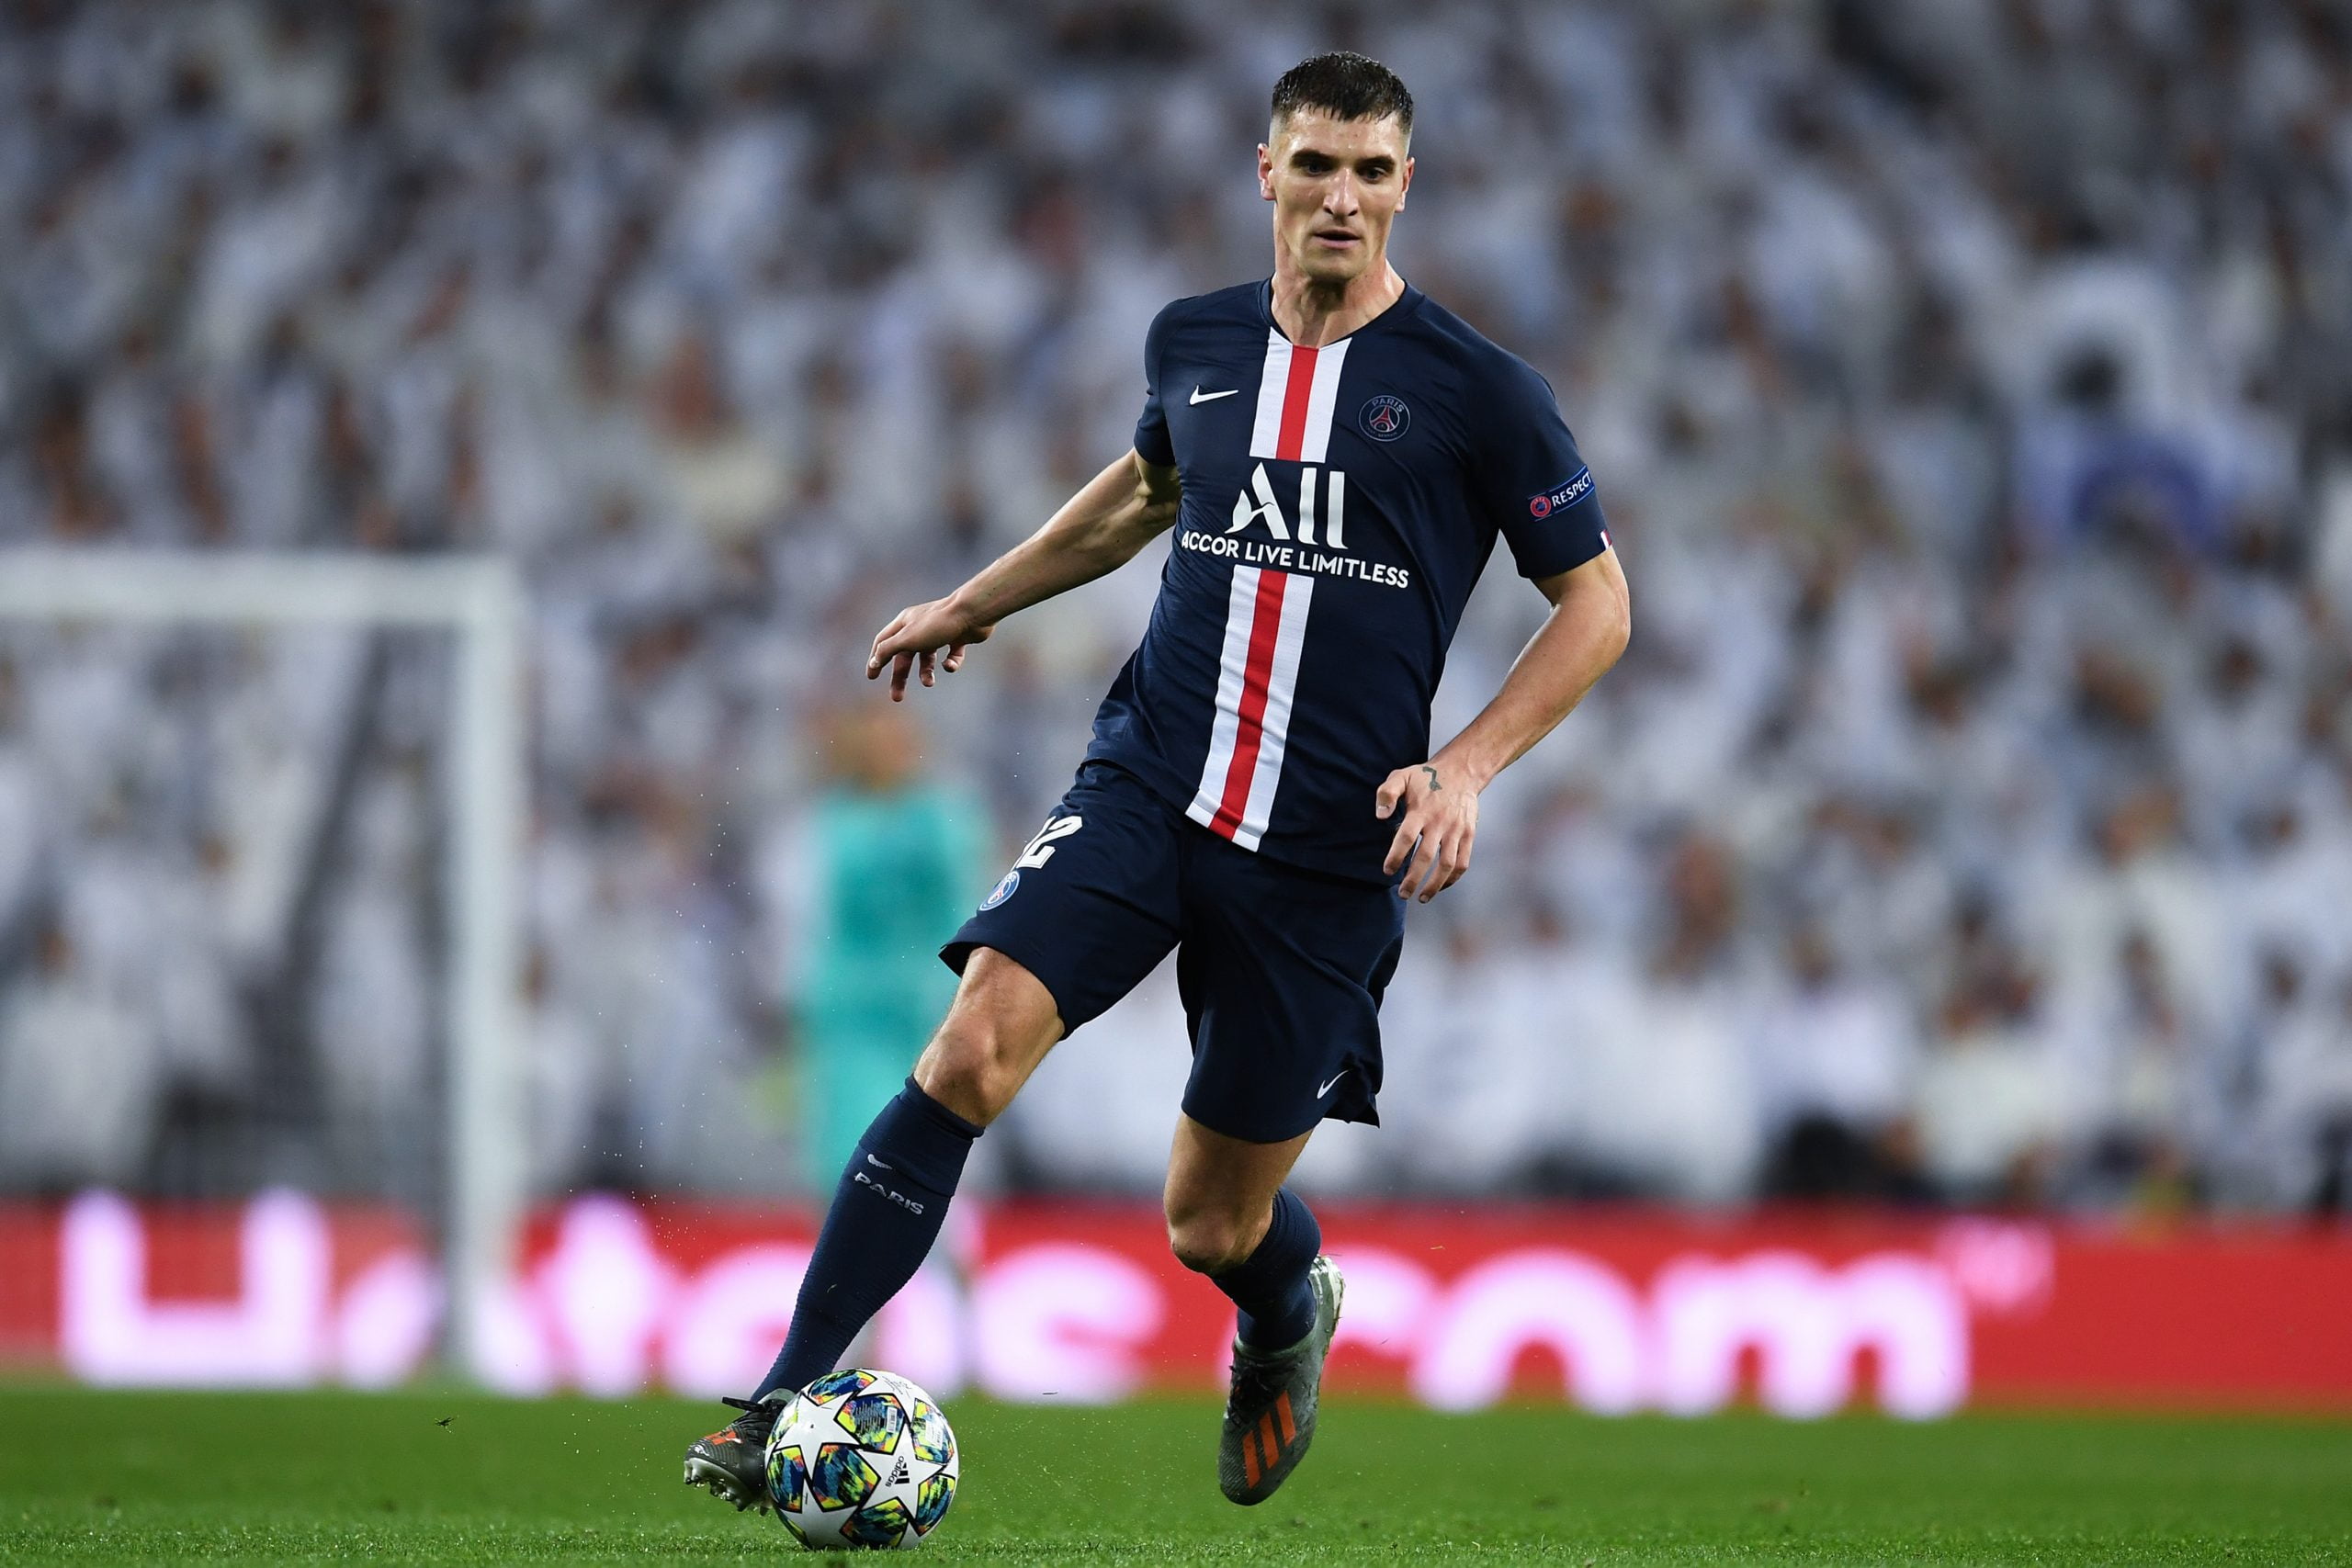 Tottenham Hotspur in talks to land Thomas Meunier, who is in action in the photo, this summer